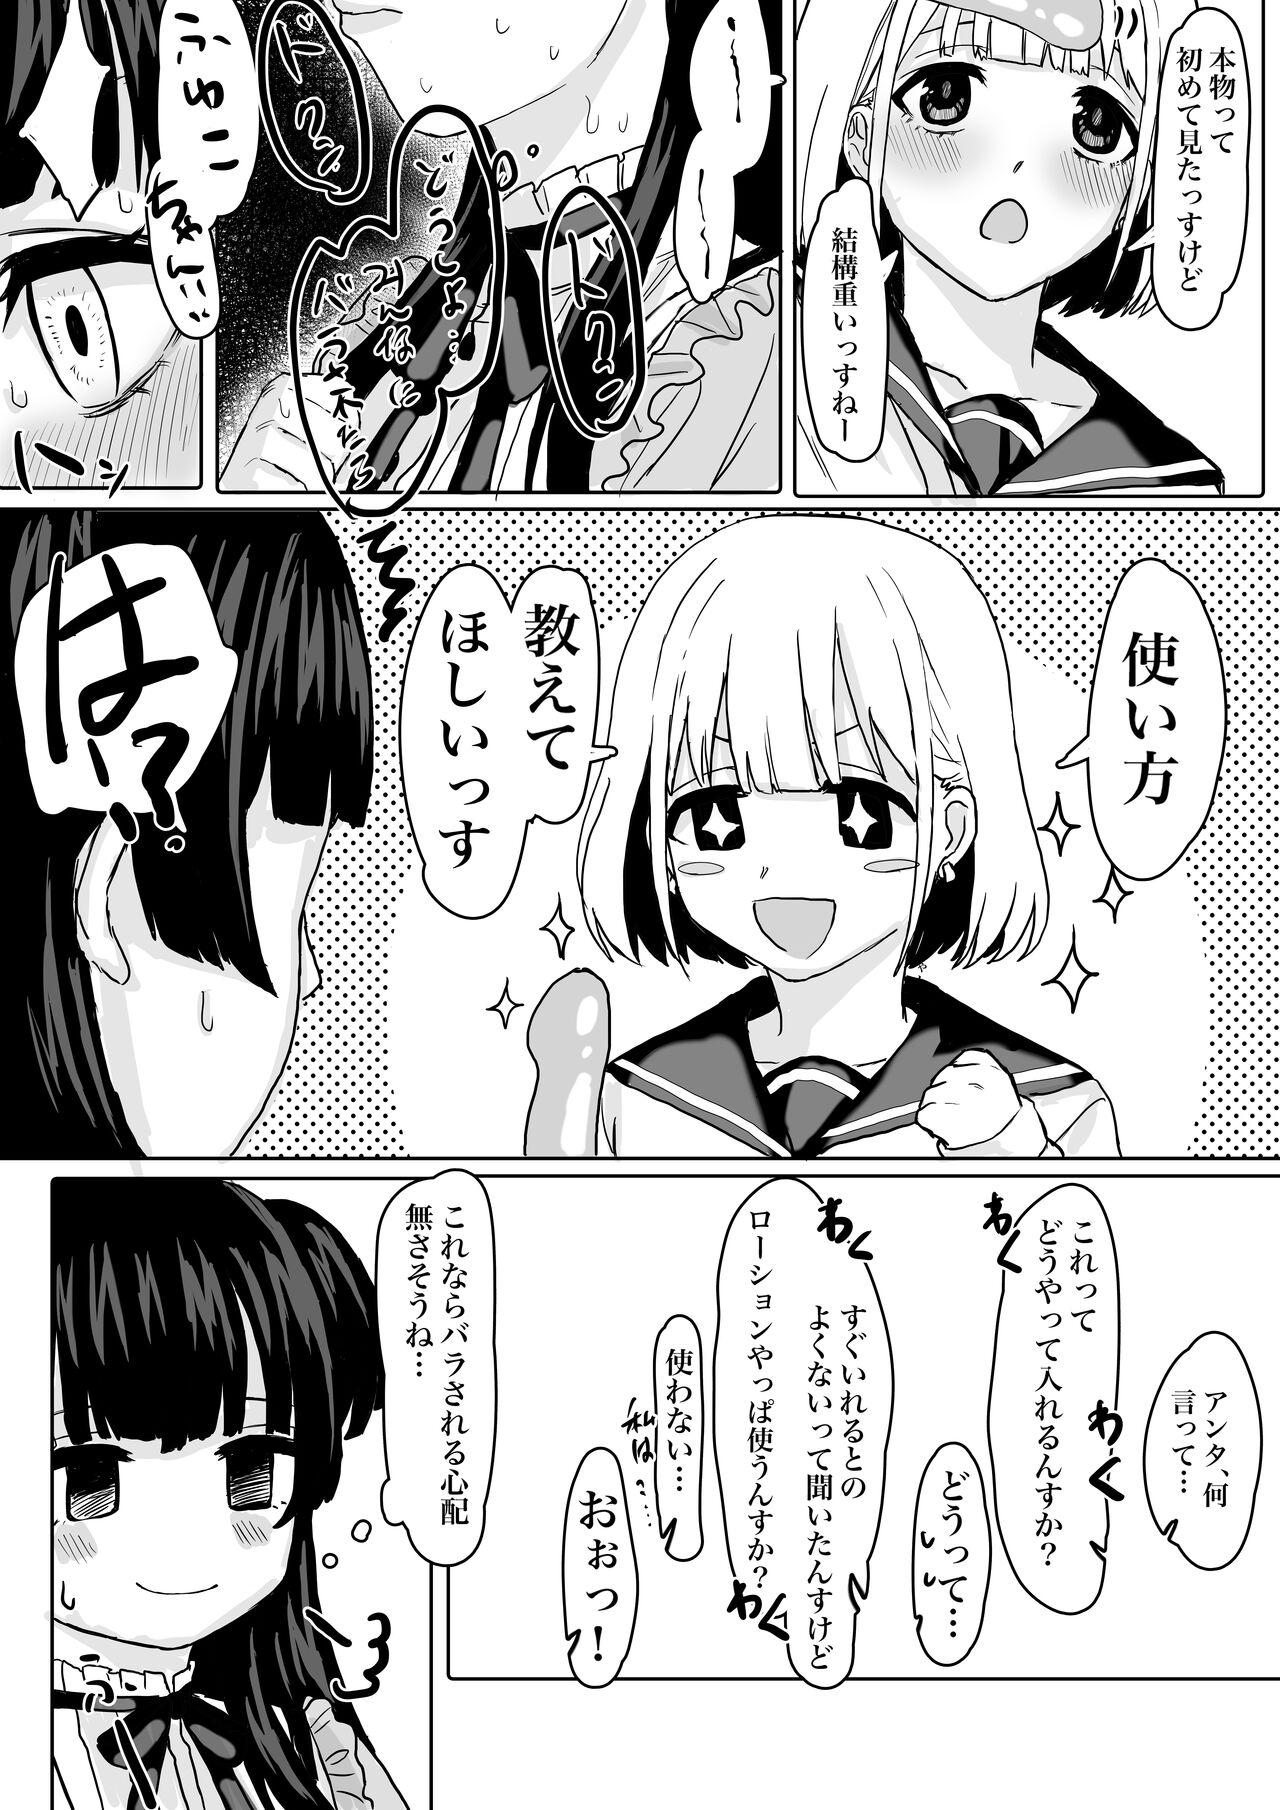 3some 「教えてほしいっす！」ふゆあさ百合 - The idolmaster Girl Girl - Page 4